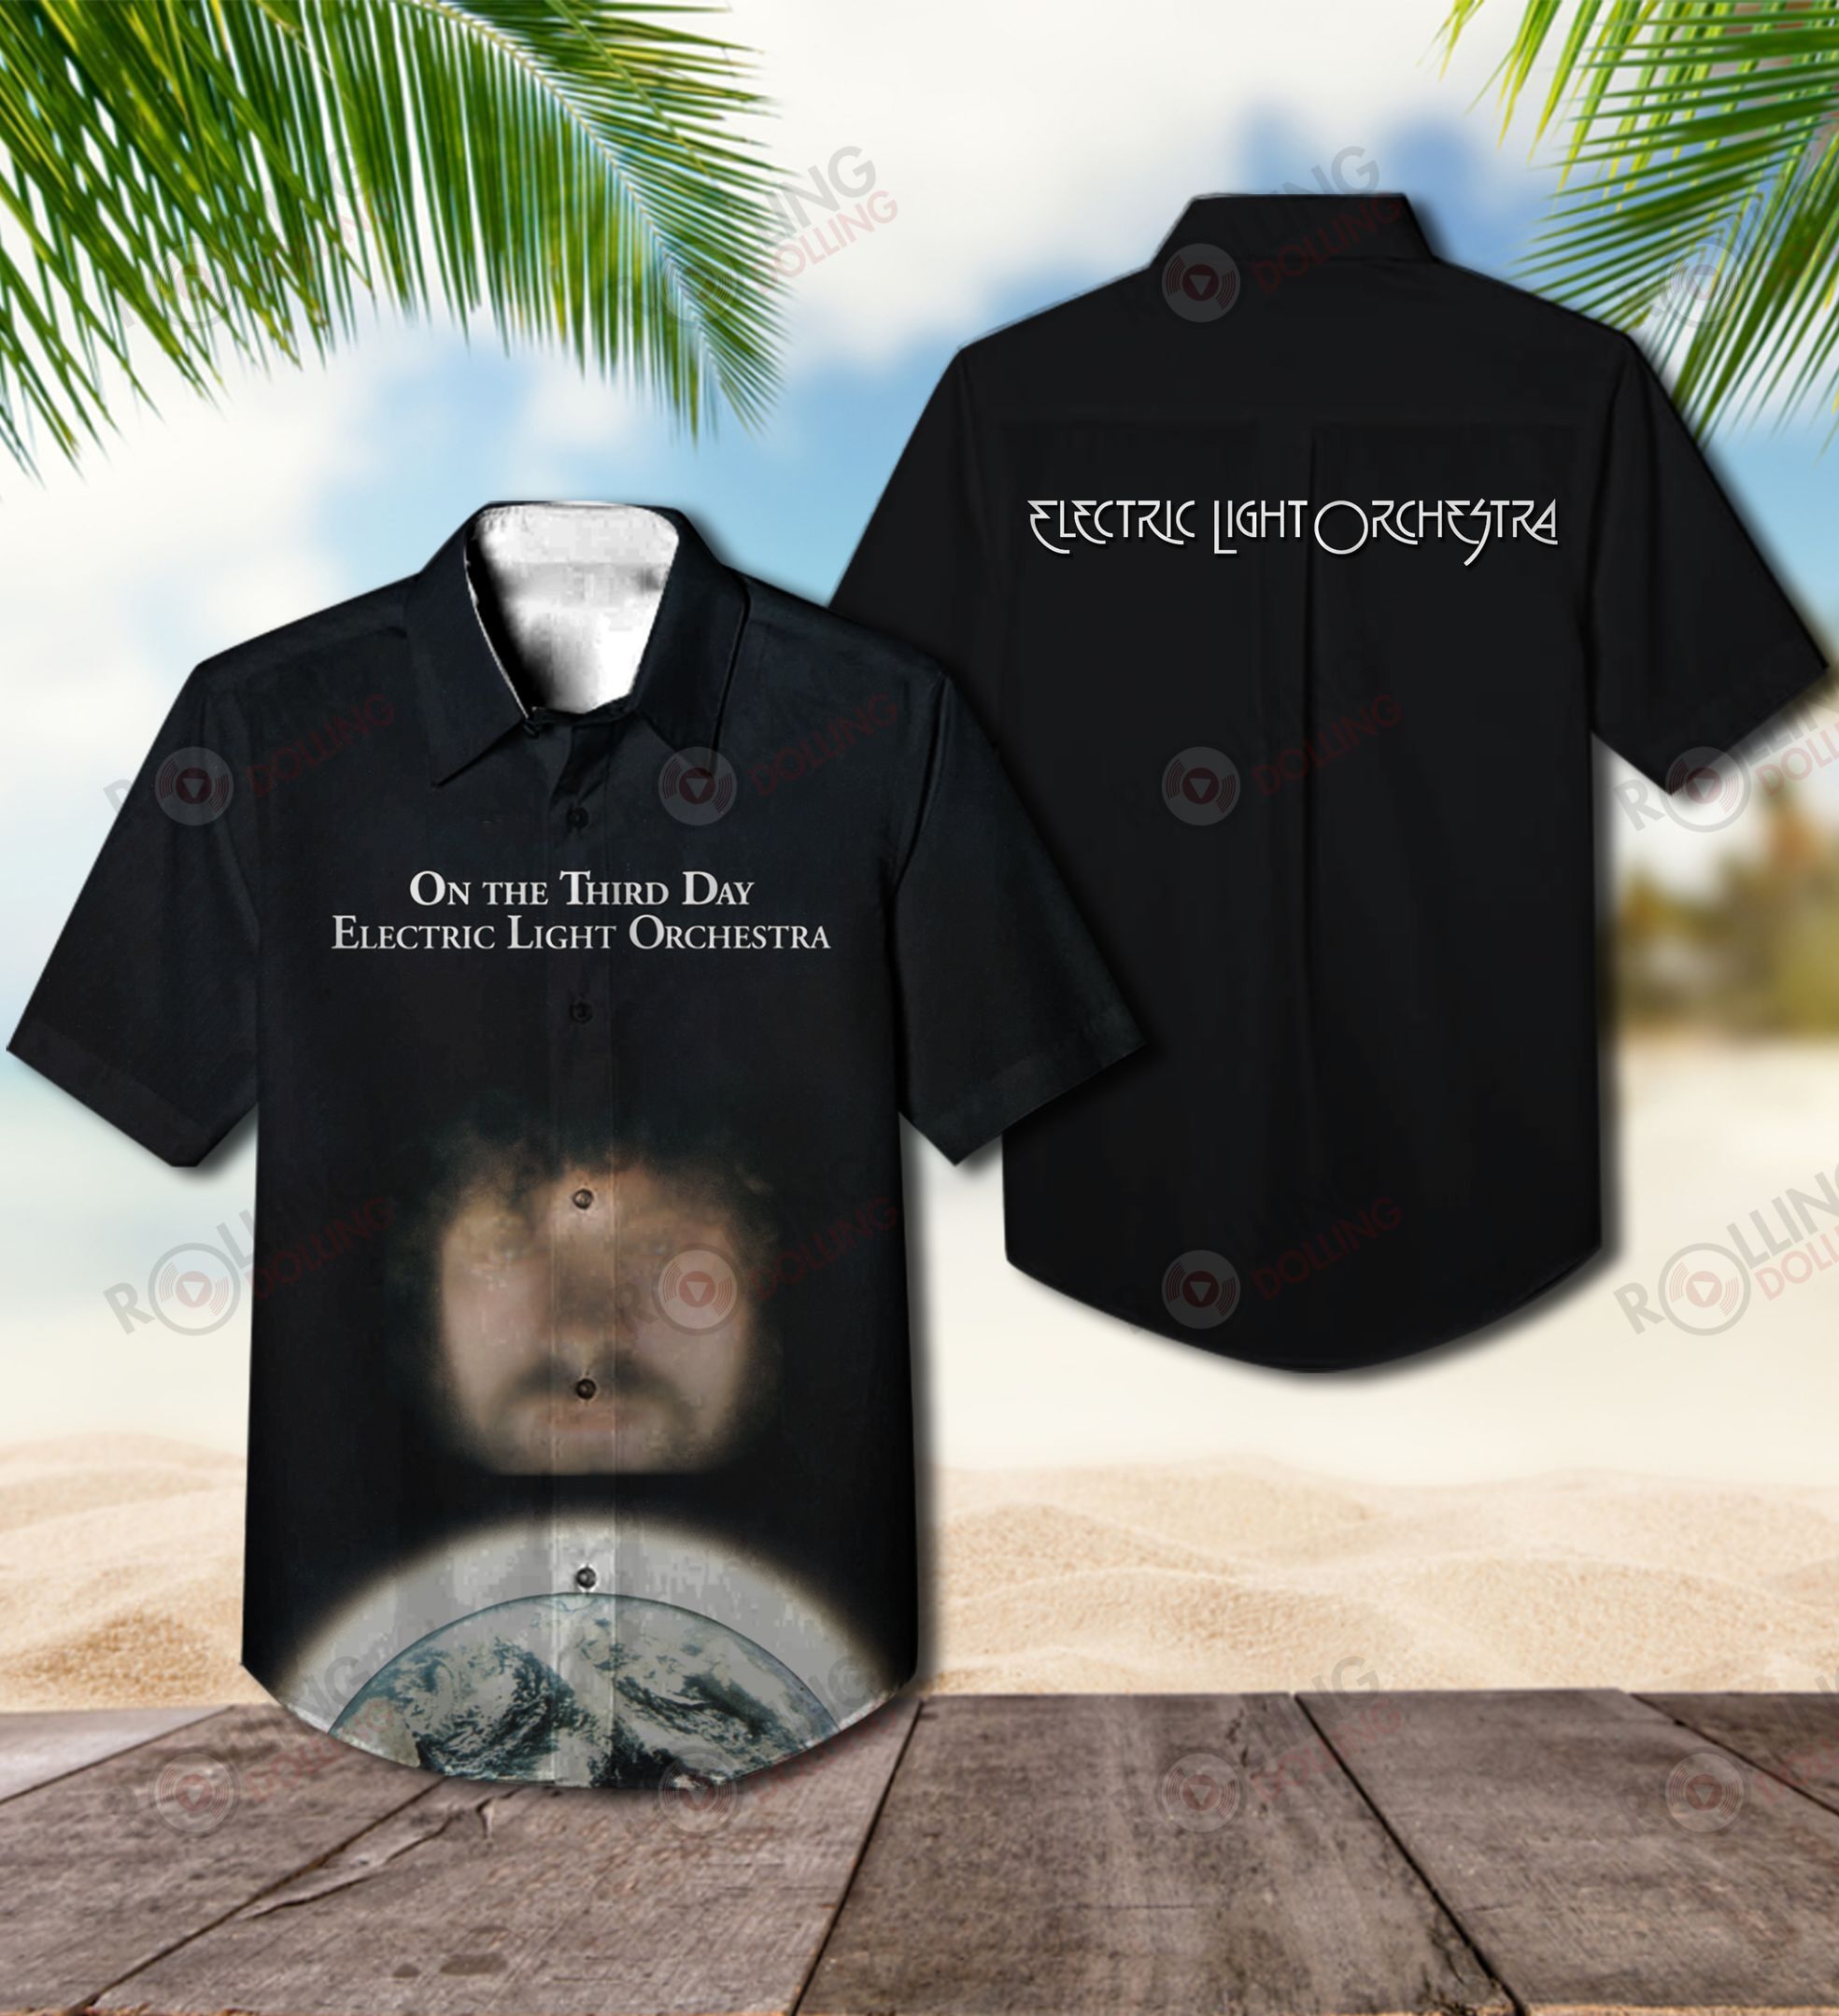 The Hawaiian Shirt is a popular shirt that is worn by Rock band fans 10